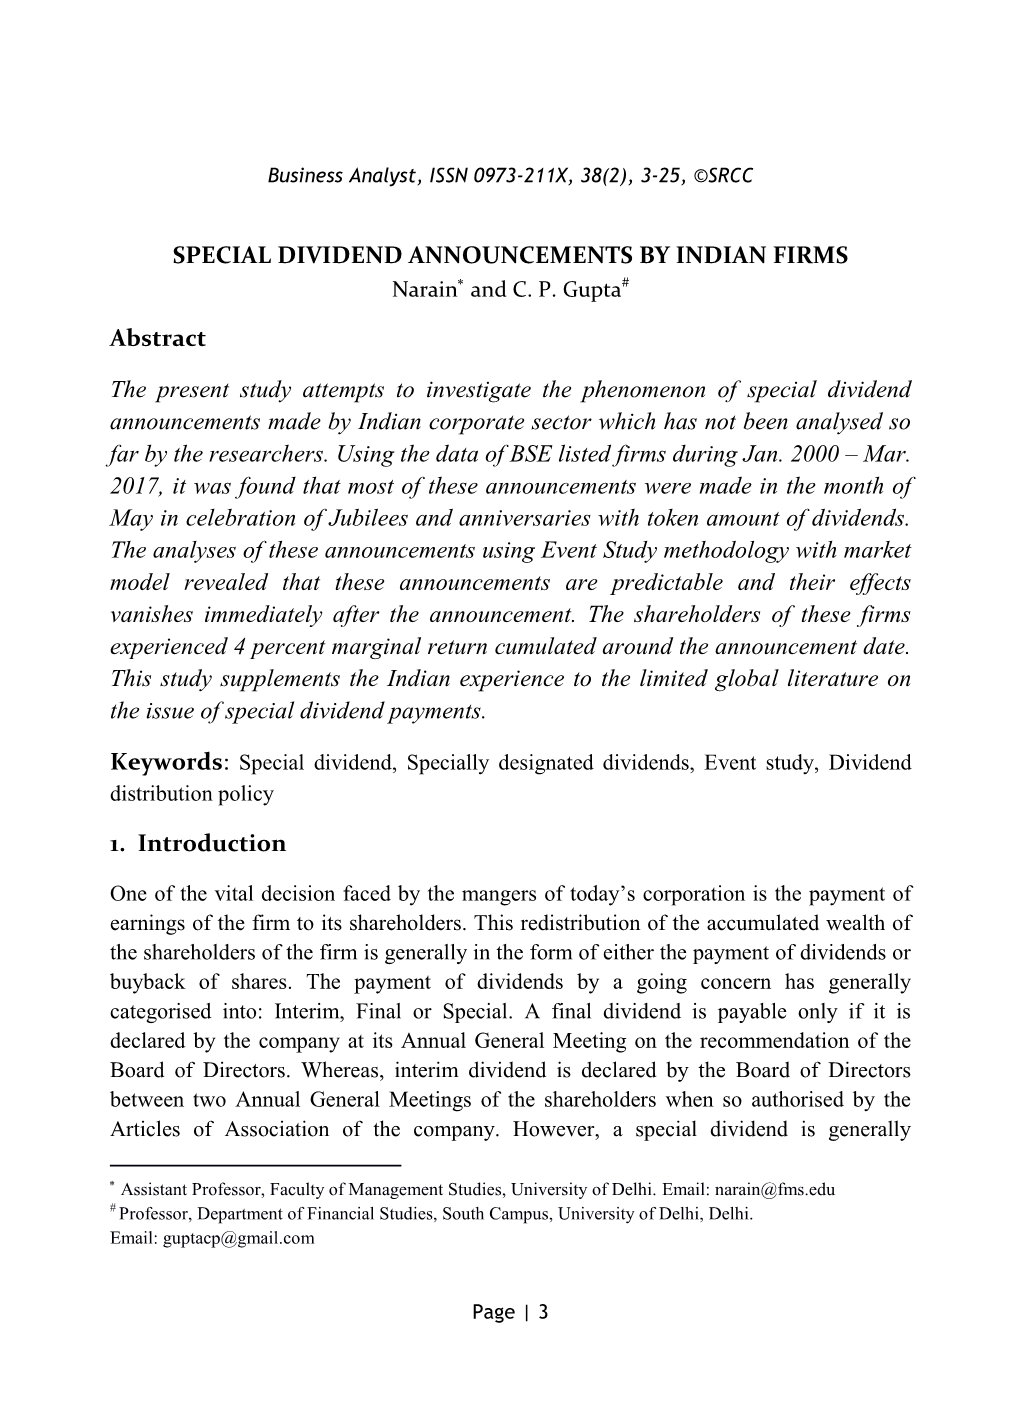 SPECIAL DIVIDEND ANNOUNCEMENTS by INDIAN FIRMS Narain and C